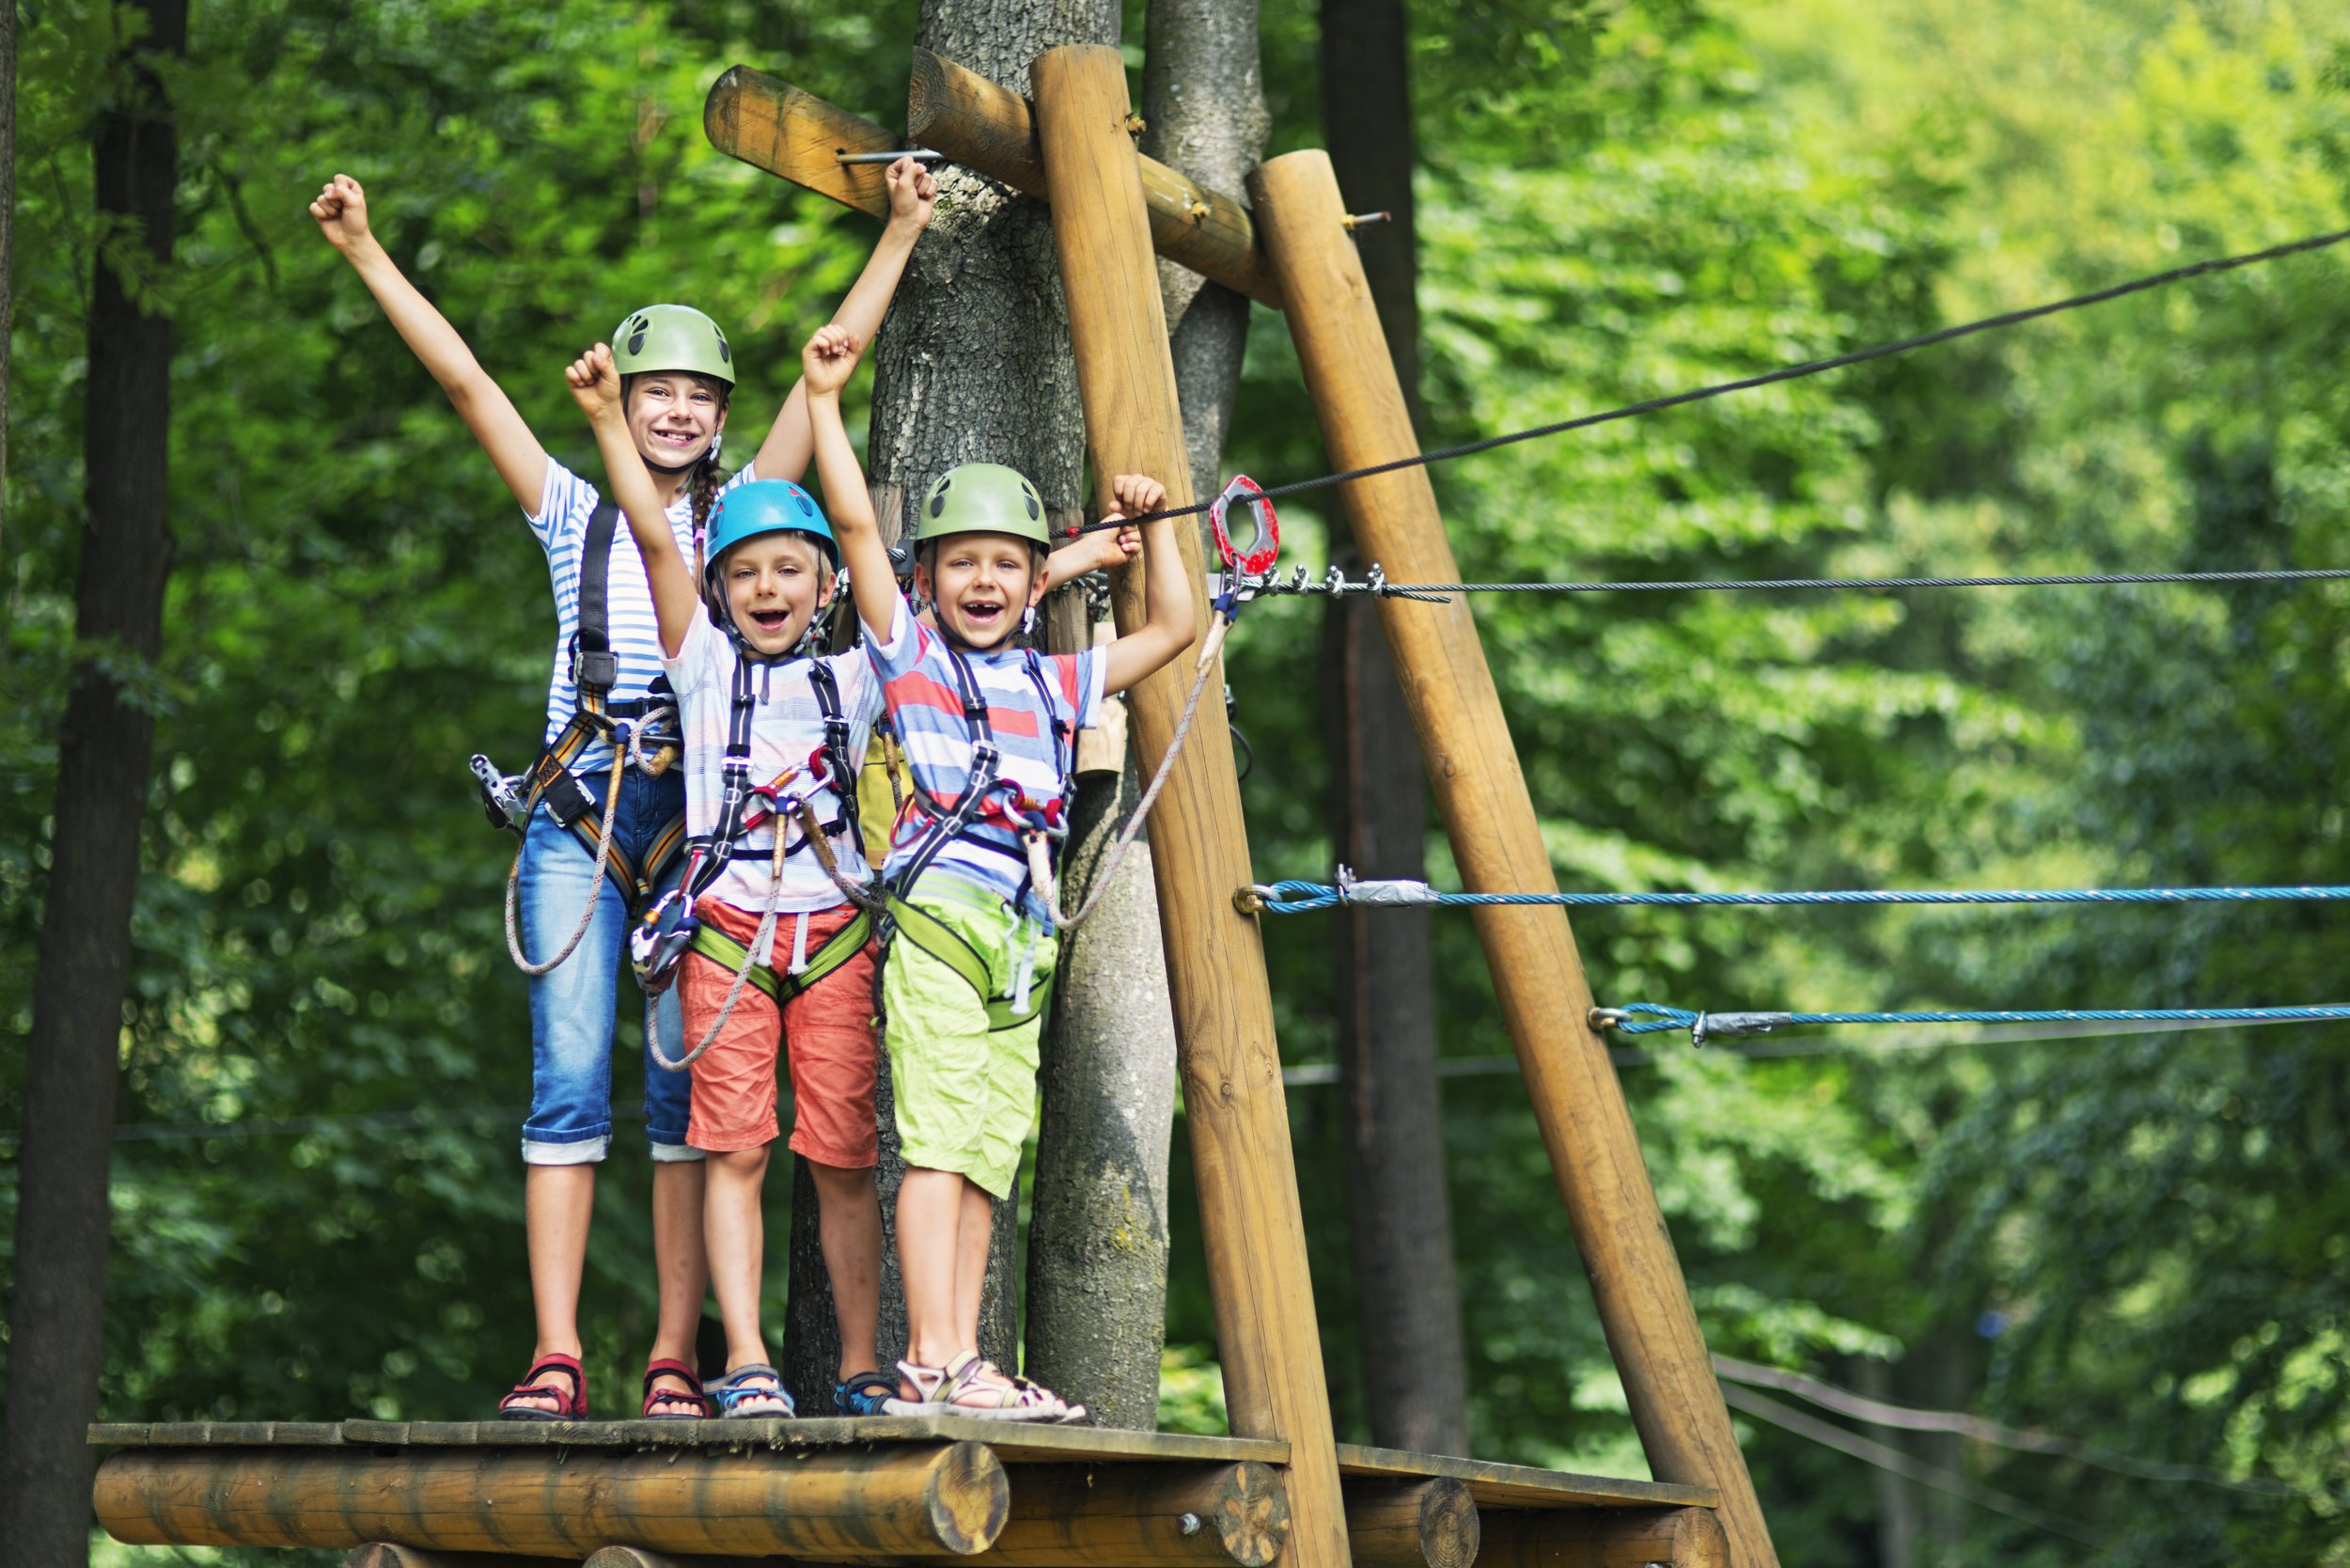 Young%20Girl%20and%20Boys%20at%20Outdoor%20Zipline%20Smiling%20with%20Arms%20up%20in%20the%20Air_iStock.jpg